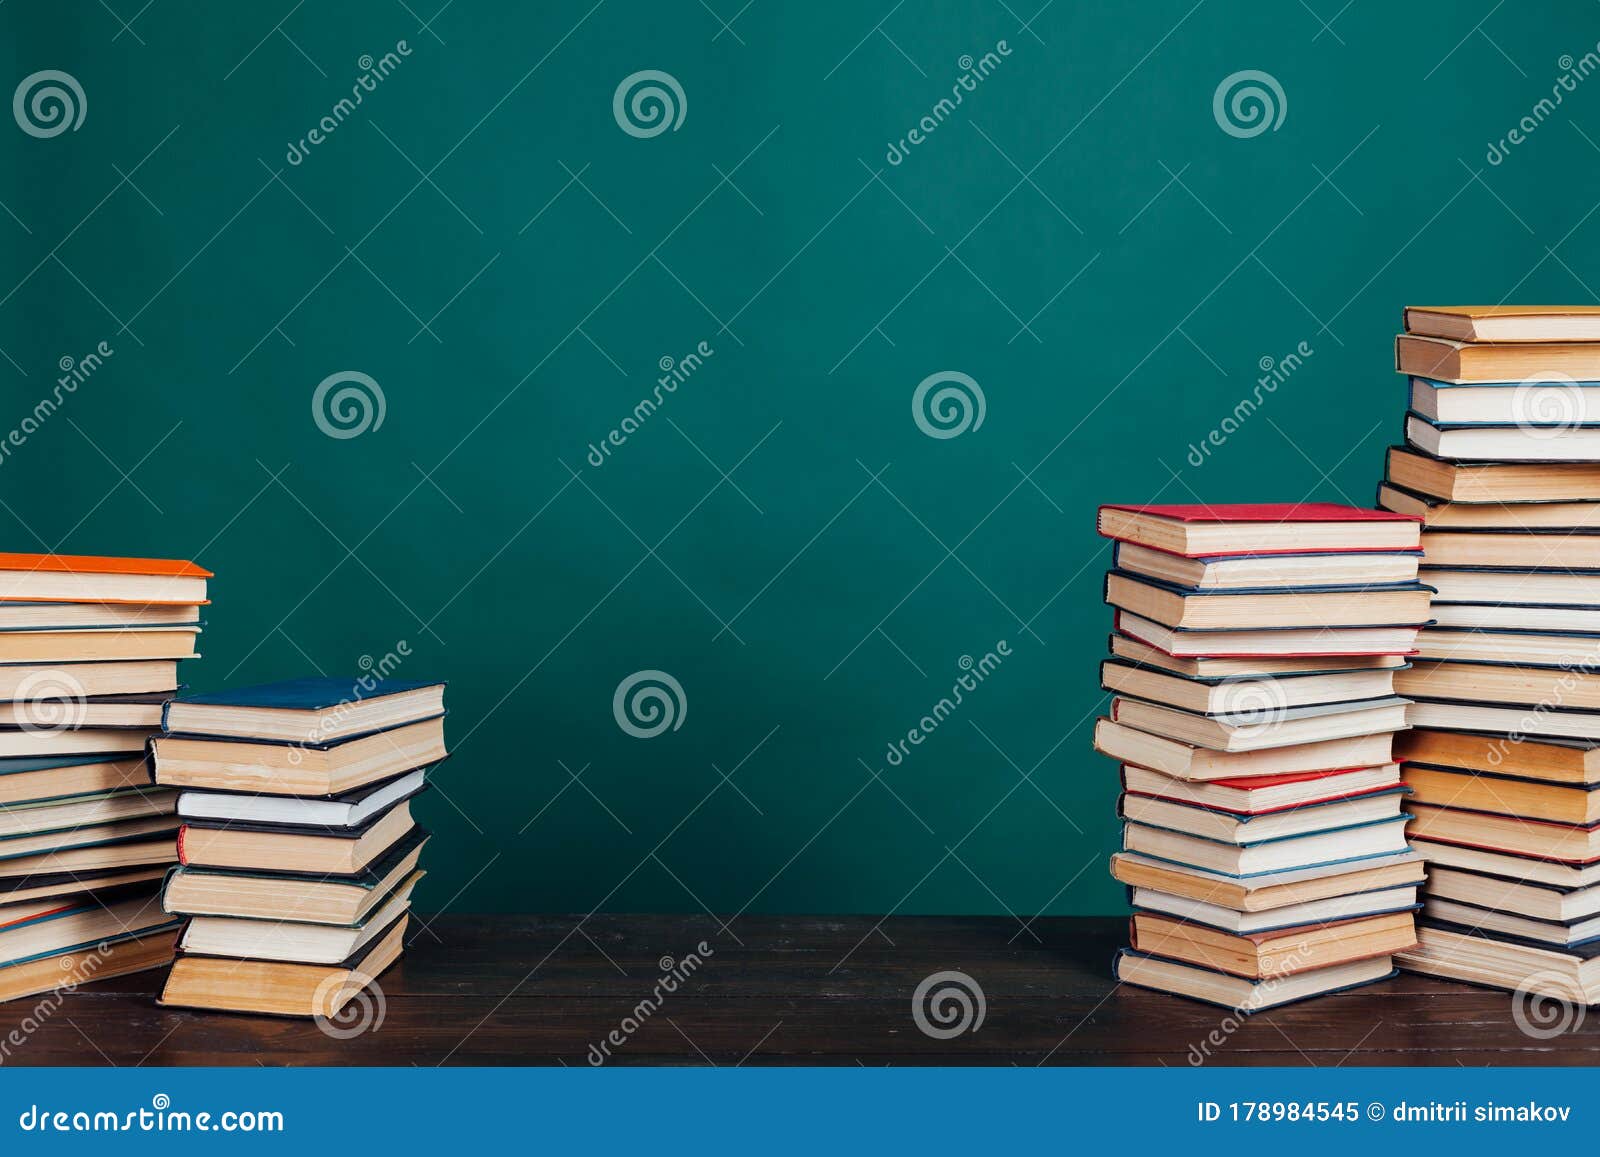 Many Stacks of Educational Books To Teach in the School Library on a ...